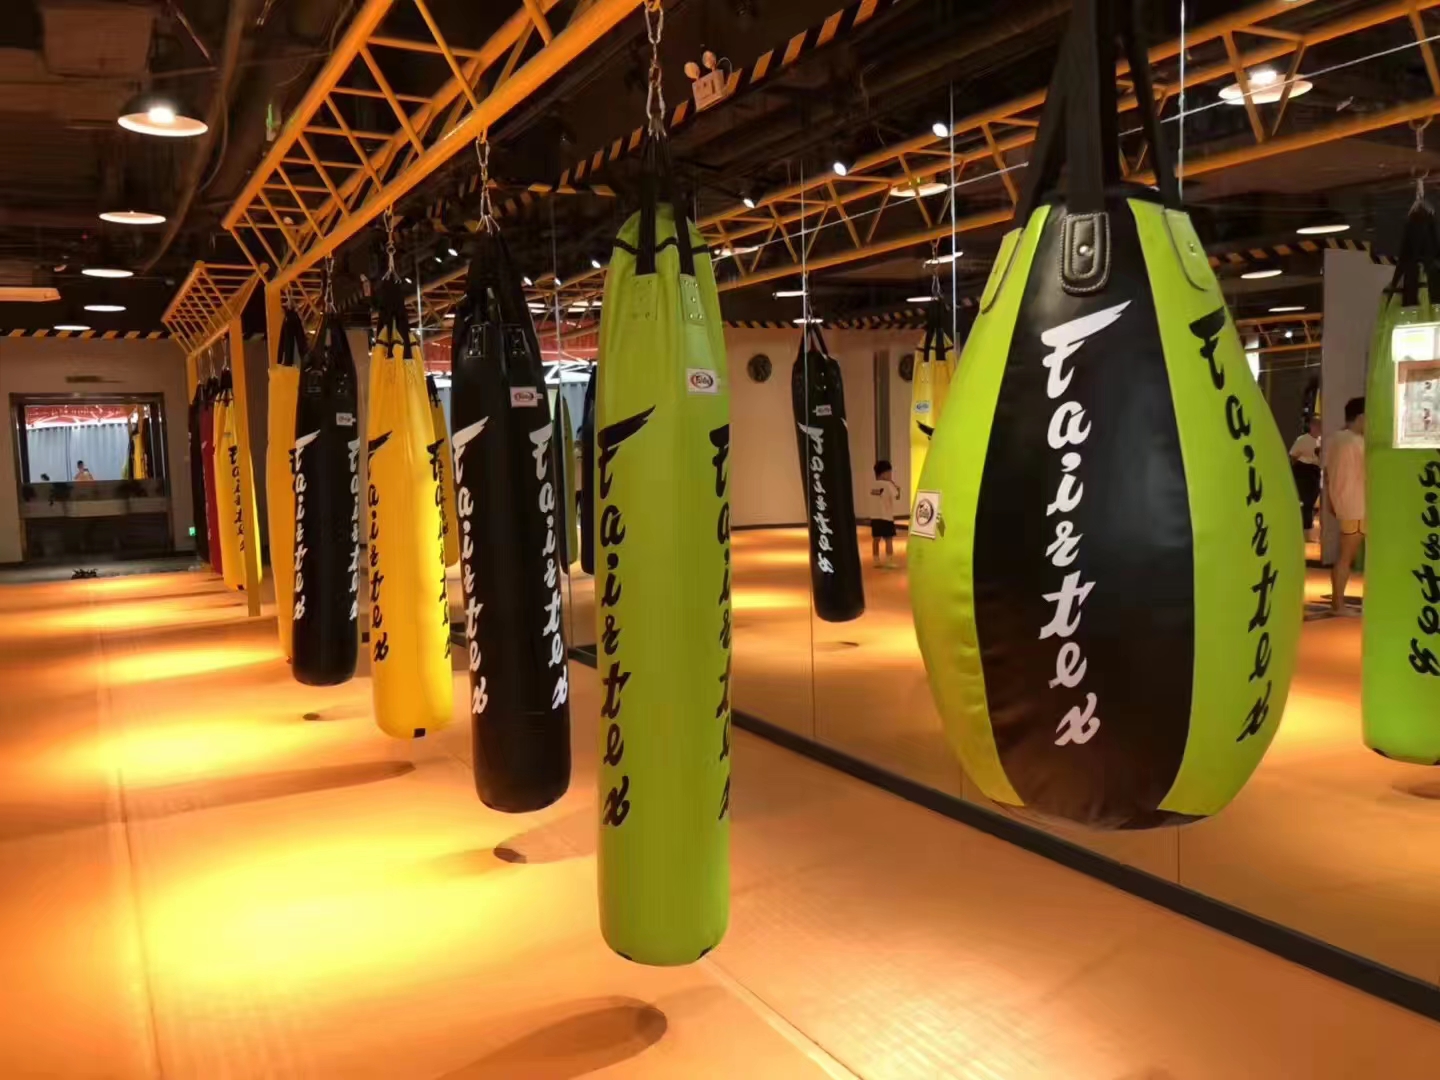 How to practice the heavy duty bag boxing traing?